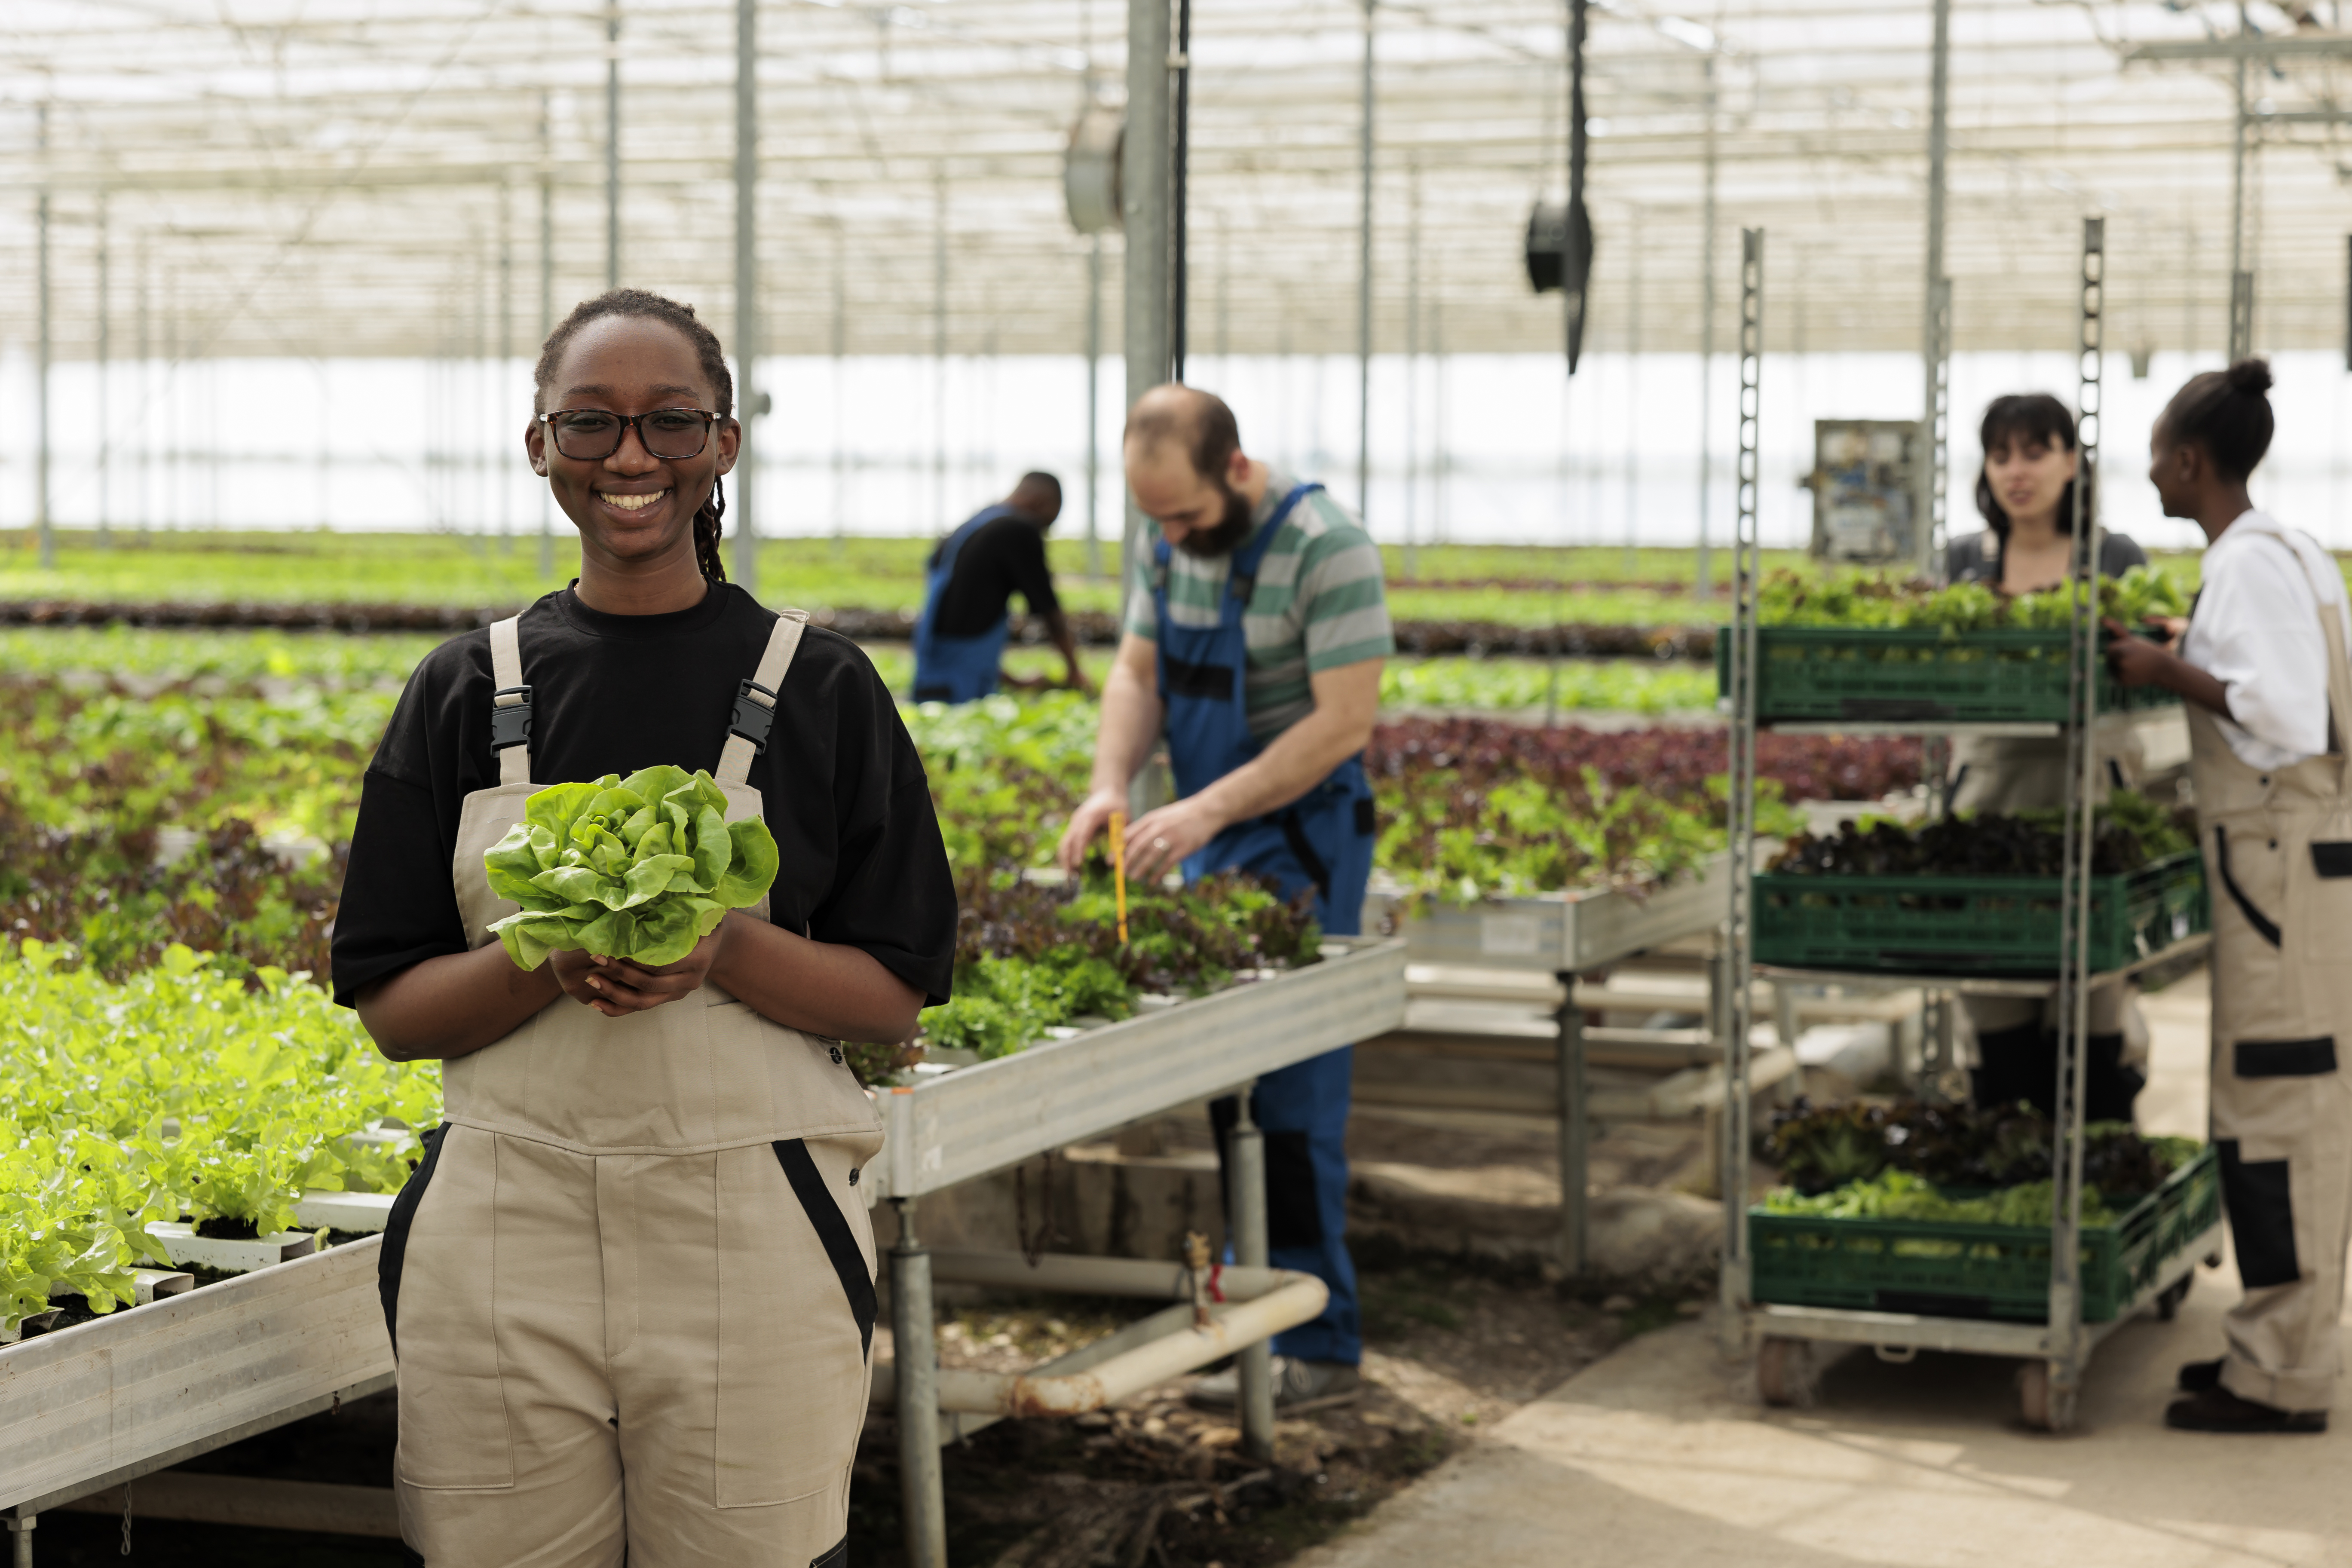 A smiling greenhouse worker holding a head of lettuce, with other workers working in the background